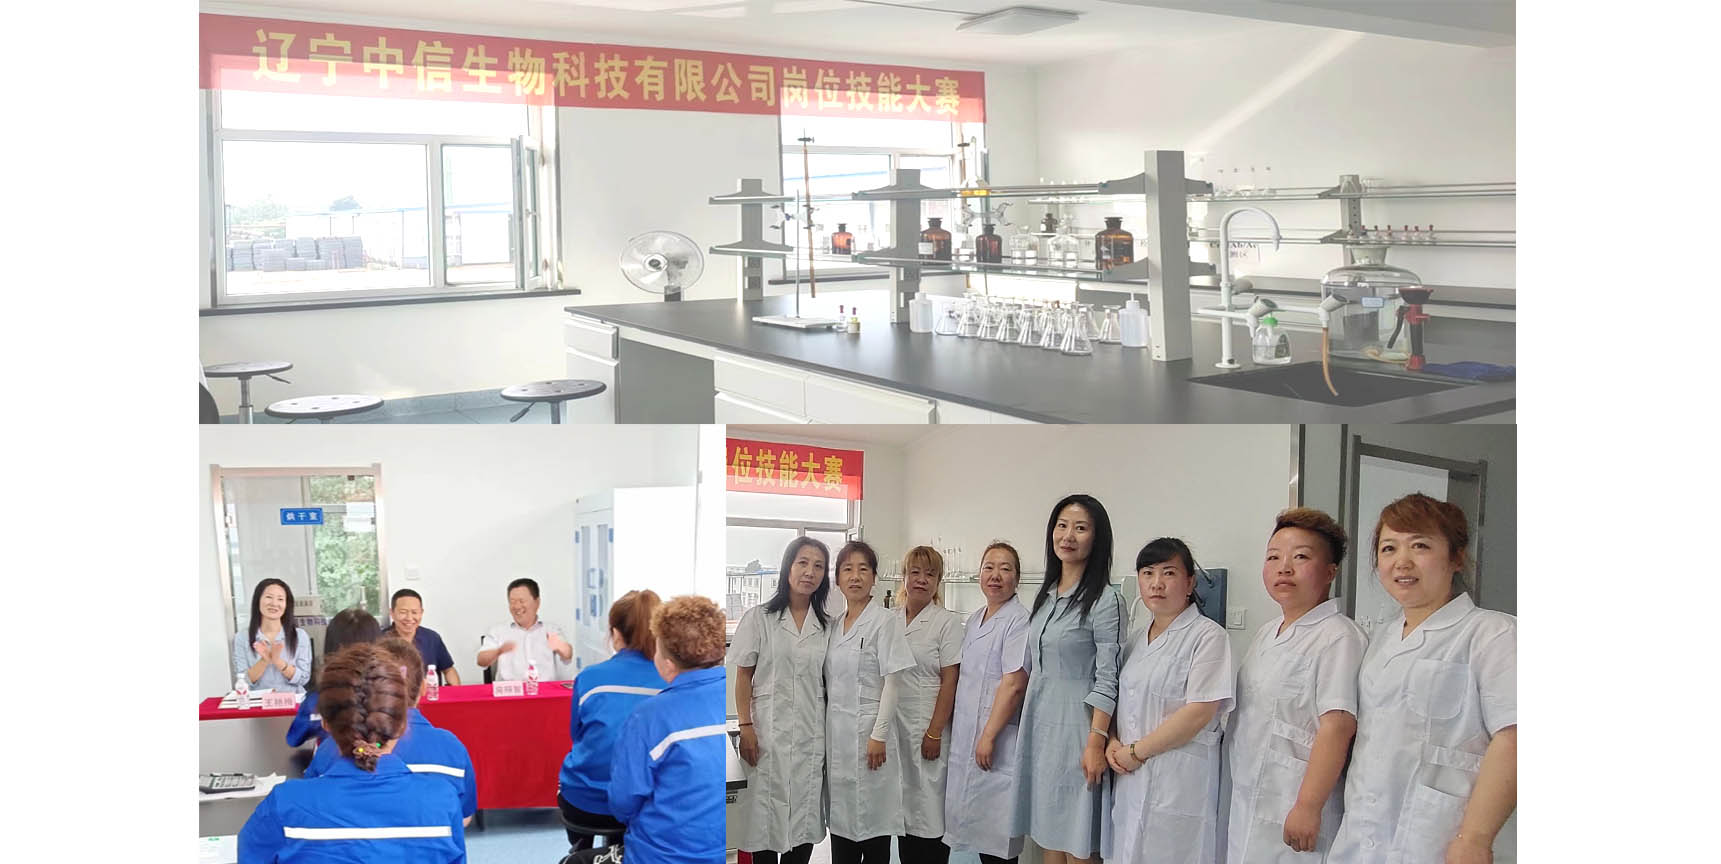 <i style='font-style:normal;color:#002D7E'>LIAONING BIOCHEM EMPLOYEE JOB SKILLS COMPETITION</i>